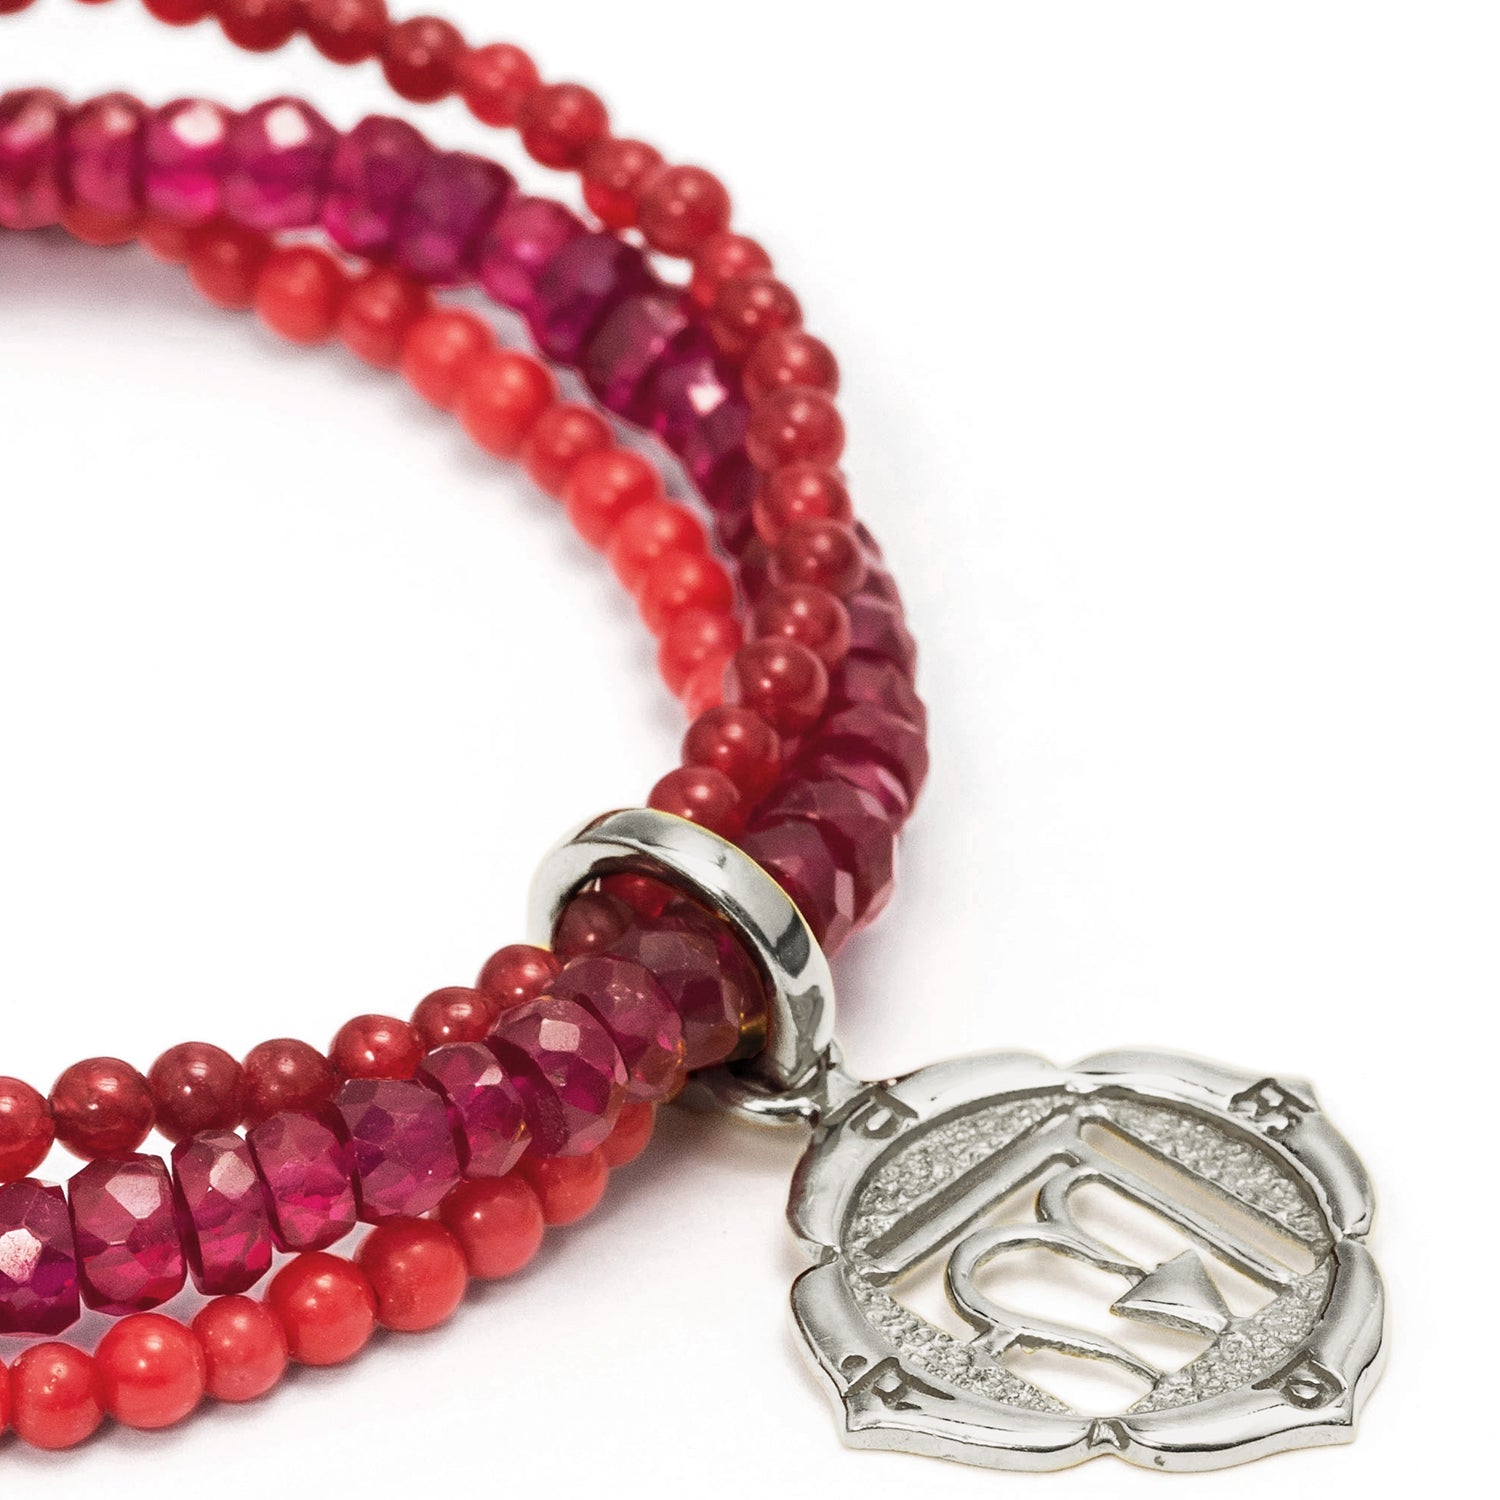 Root chakra bracelet made of three gemstone strands with sterling silver applications from ETERNAL BLISS - Spiritual jewelry